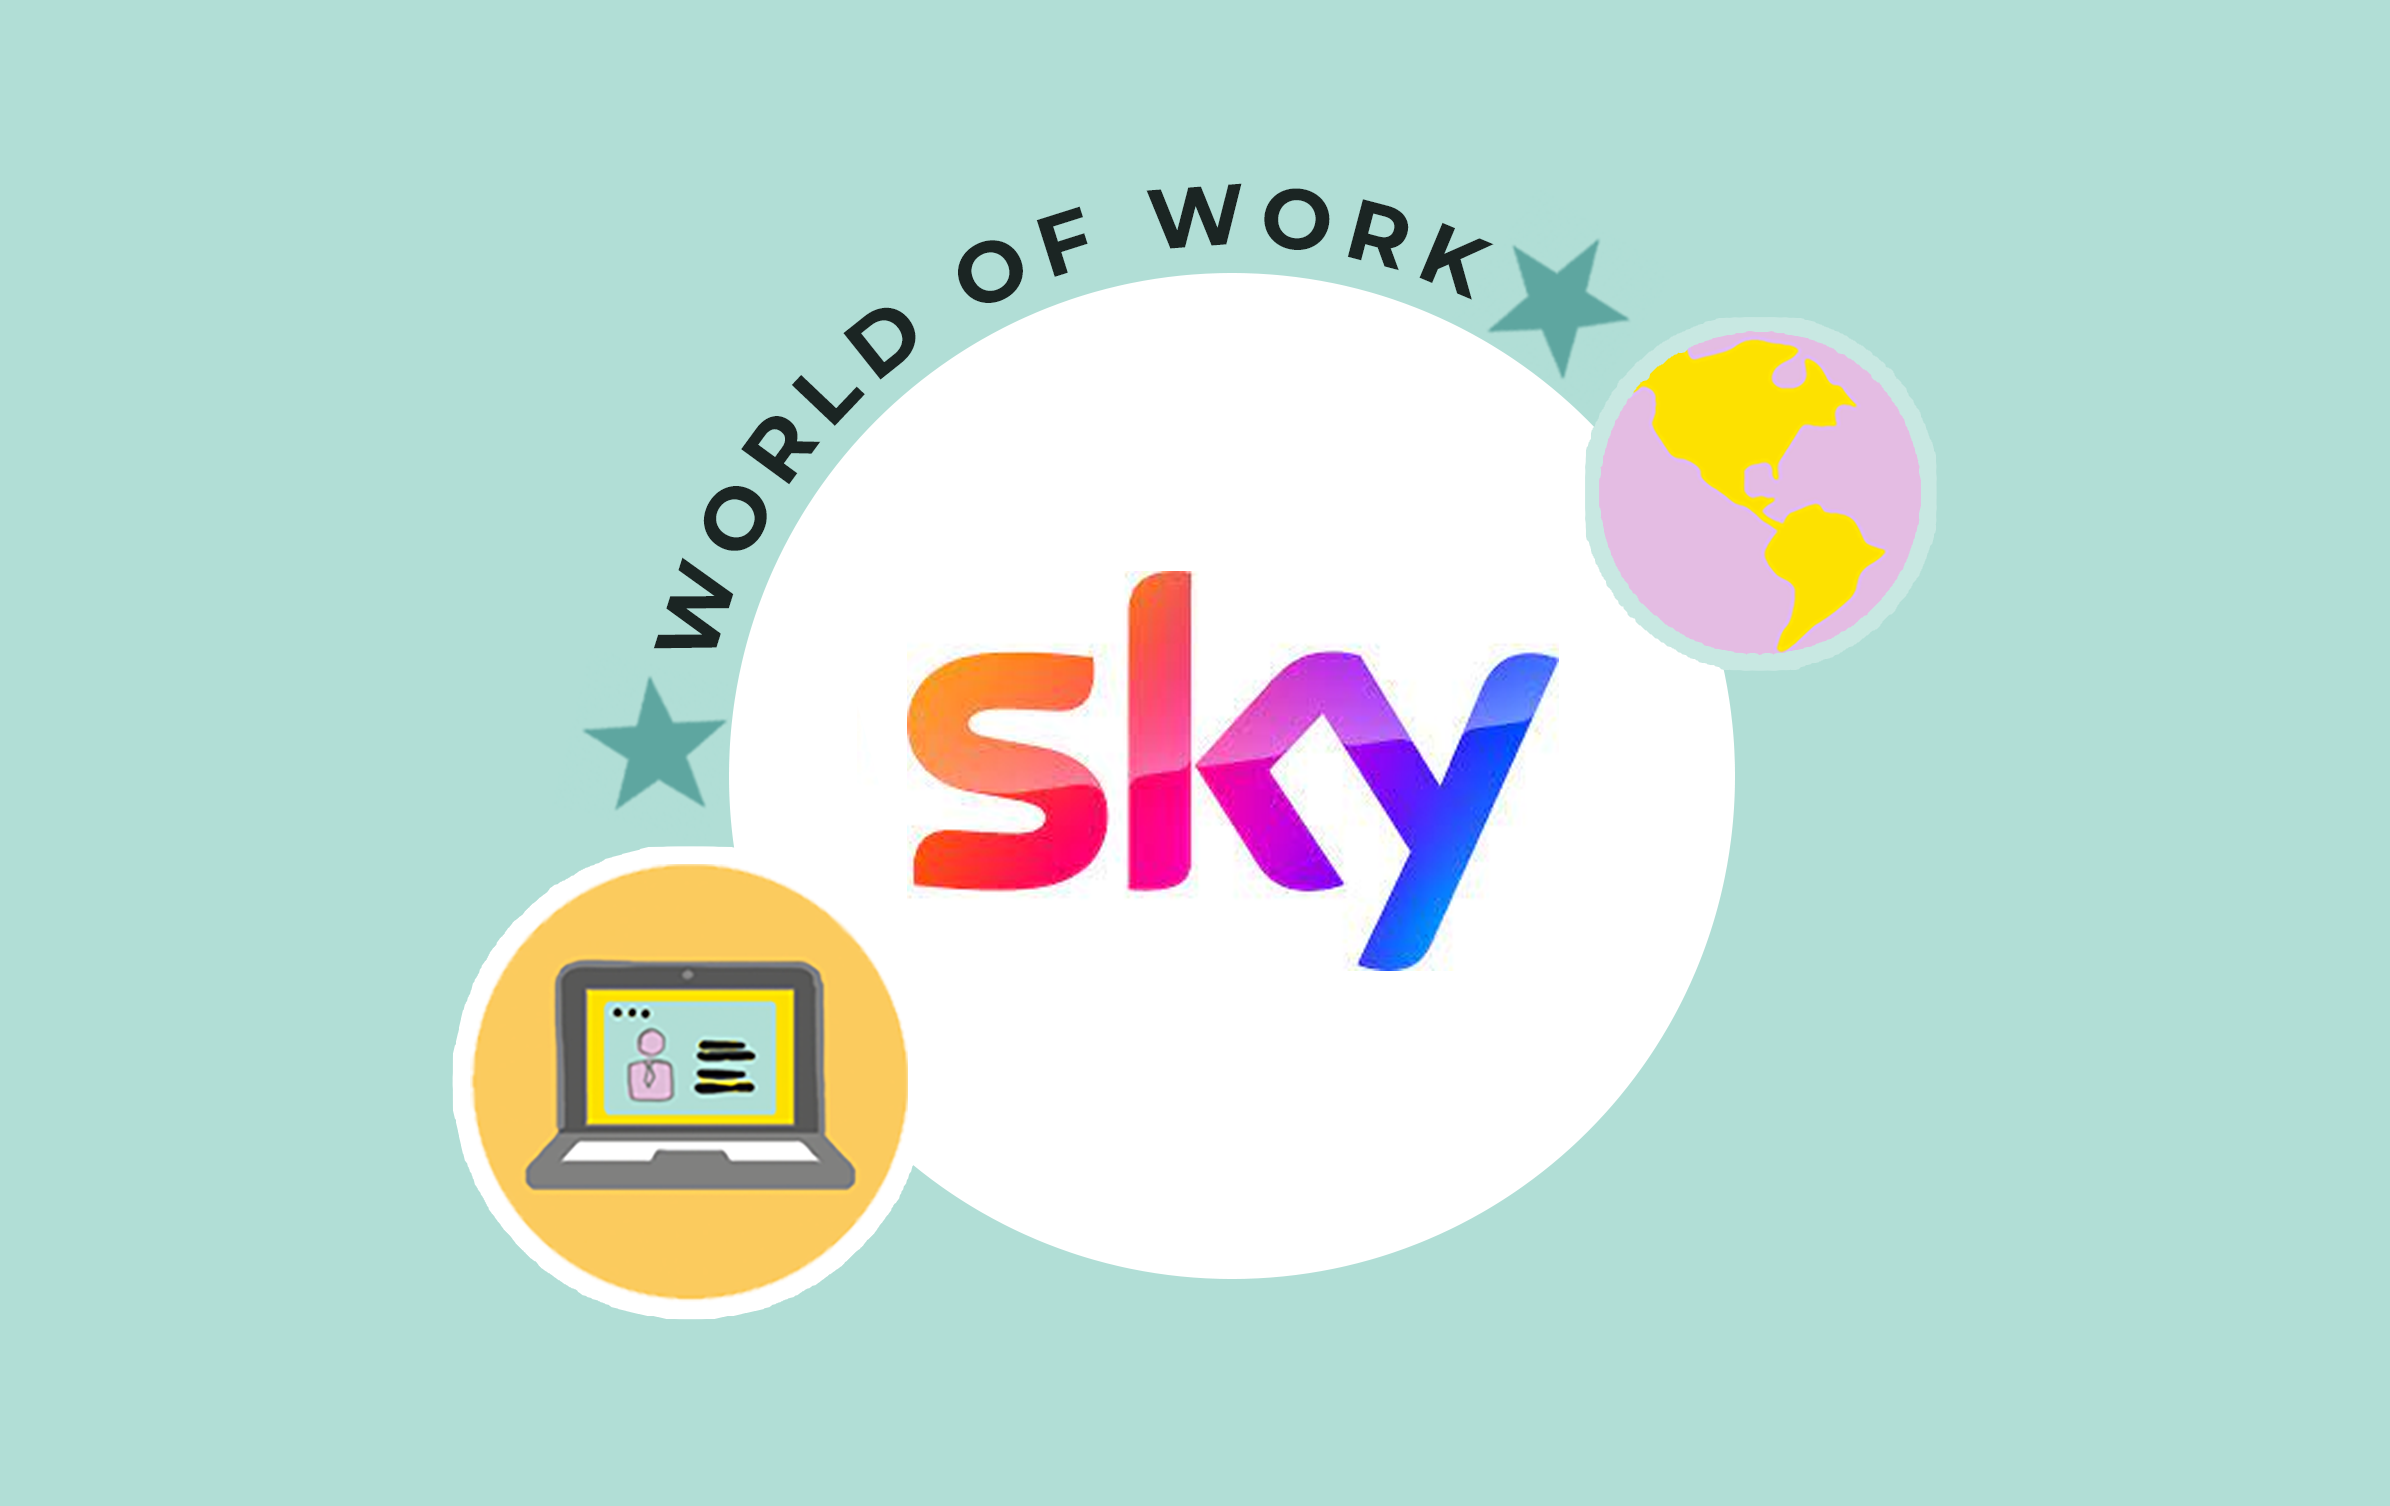 Working at Sky